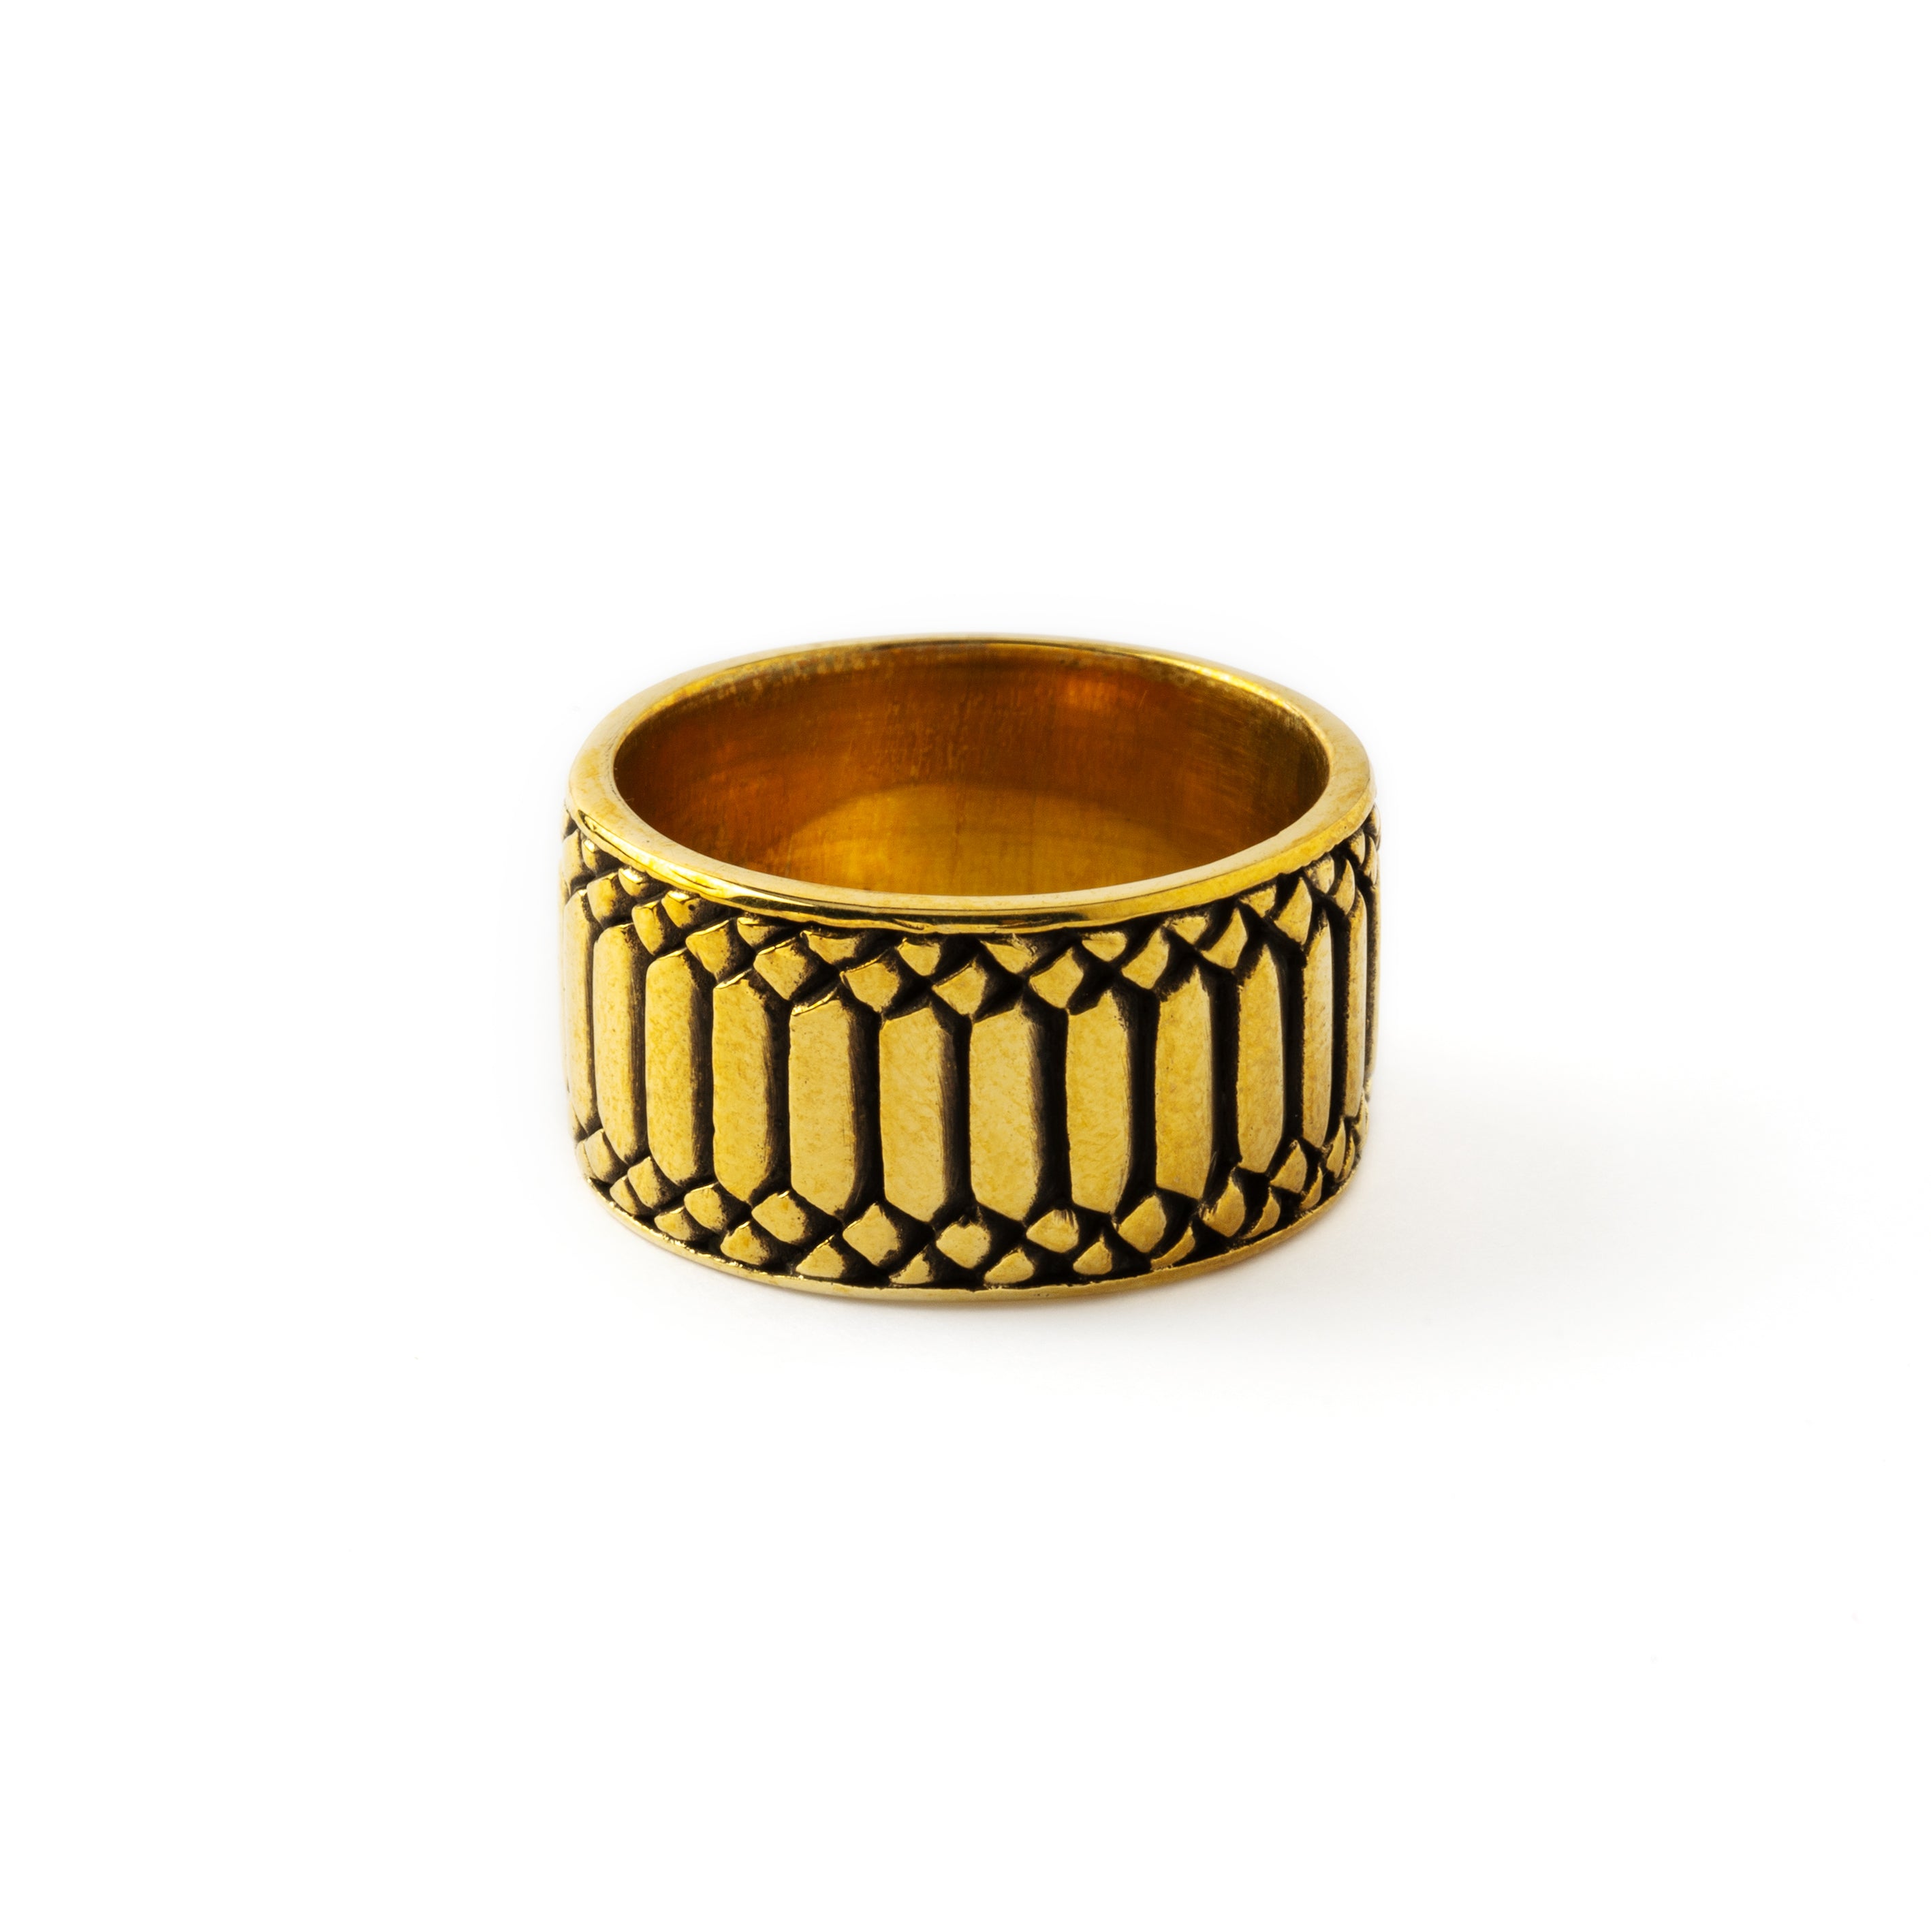 Apophis Rebirth golden brass thick band ring with geometric pattern frontal view